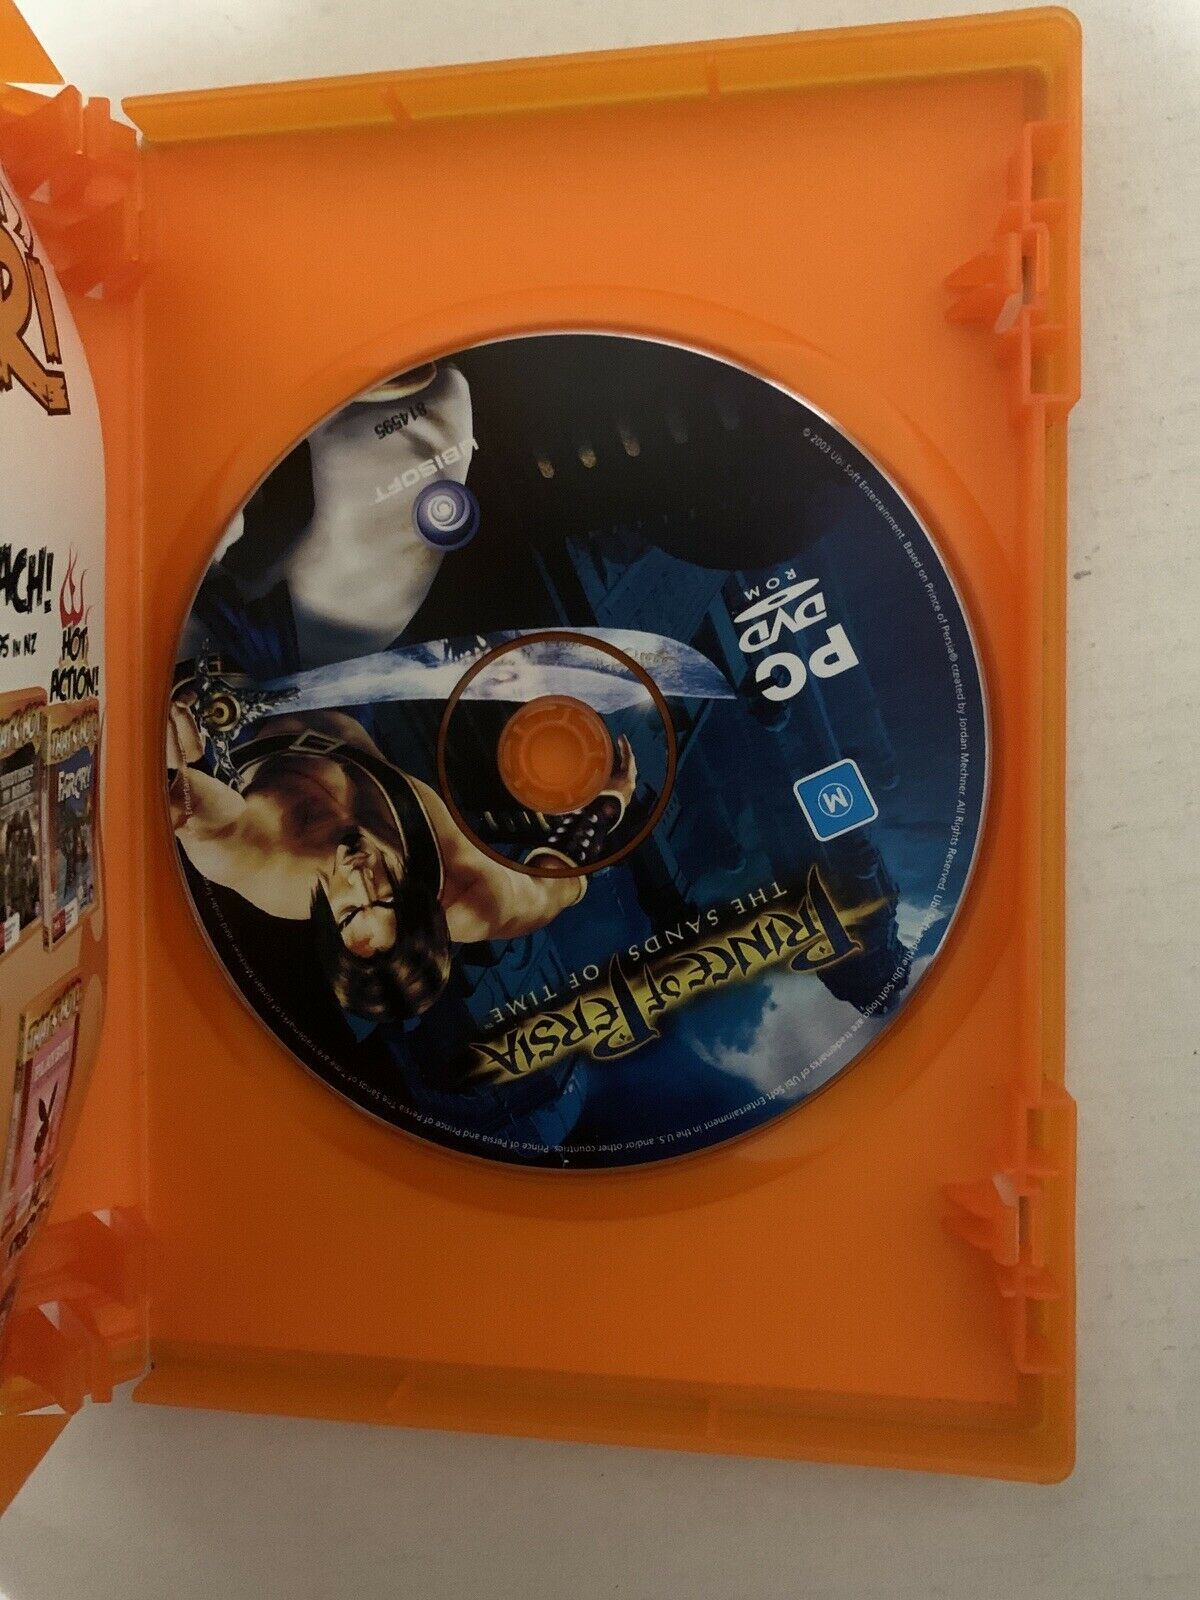 Prince of Persia: The Sands Of Time - PC DVD Action Windows Game